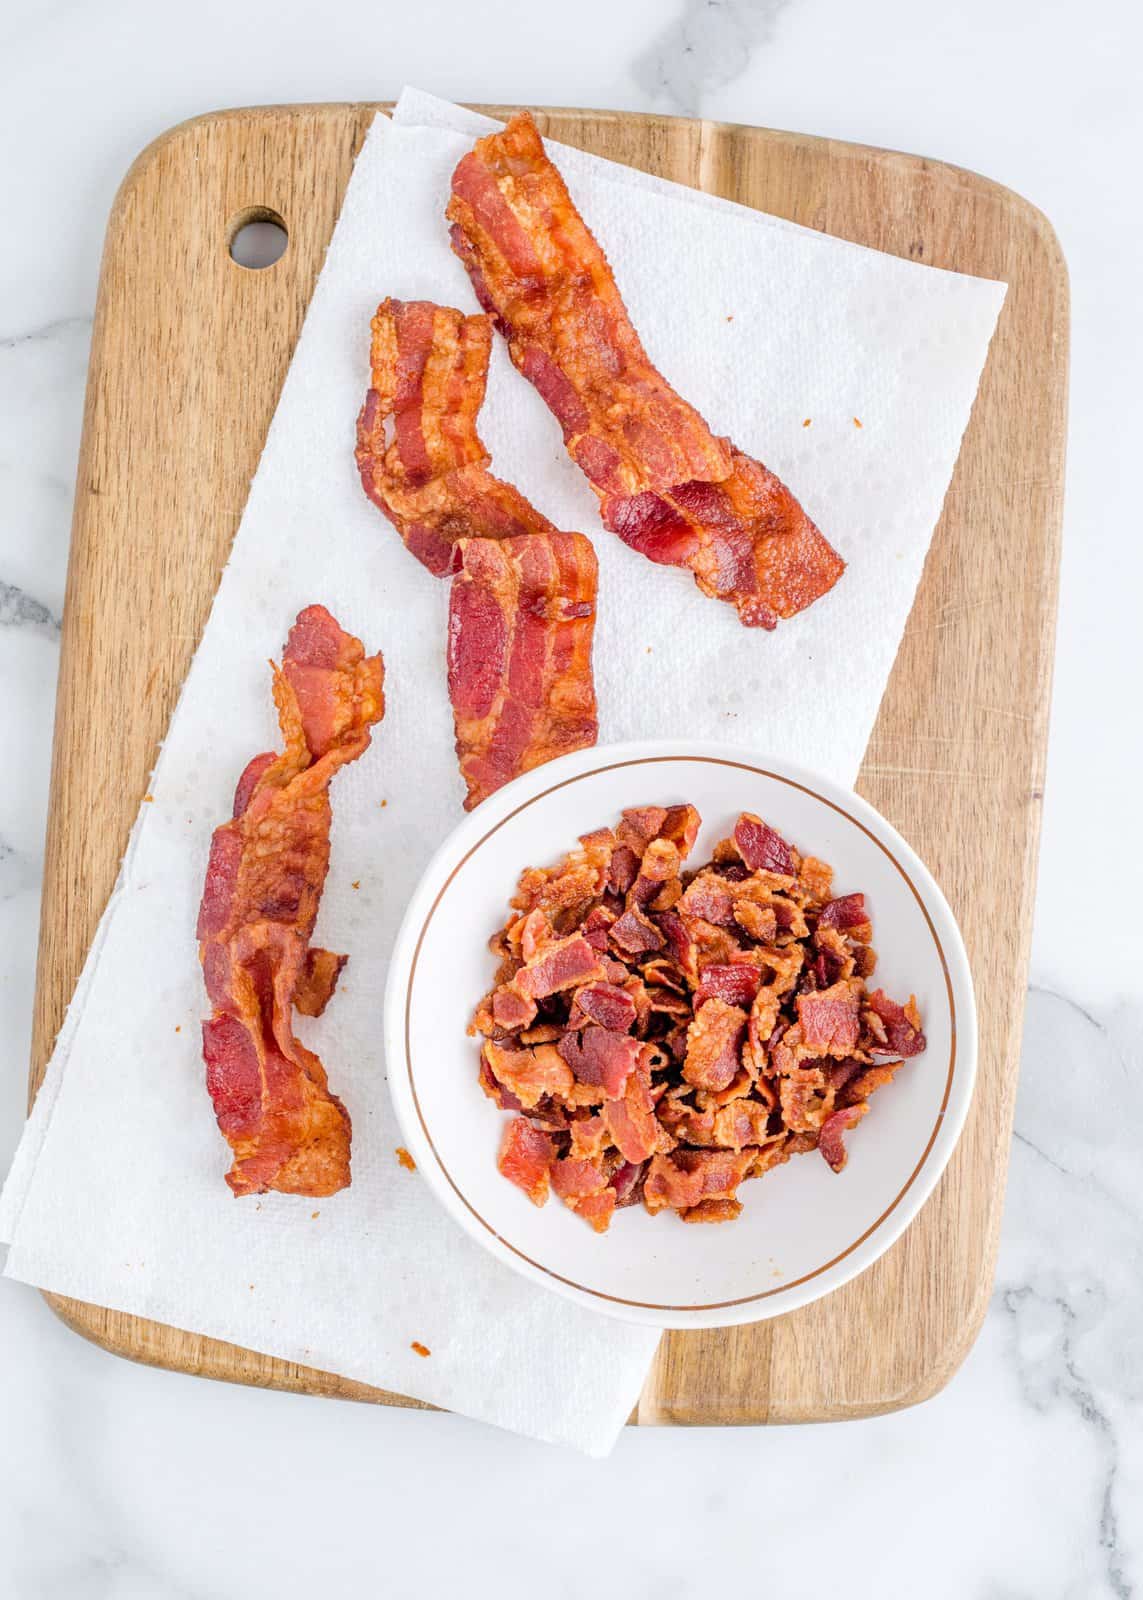 cooked bacon shown on a paper towel with some of the bacon shown crumbled in a bowl.